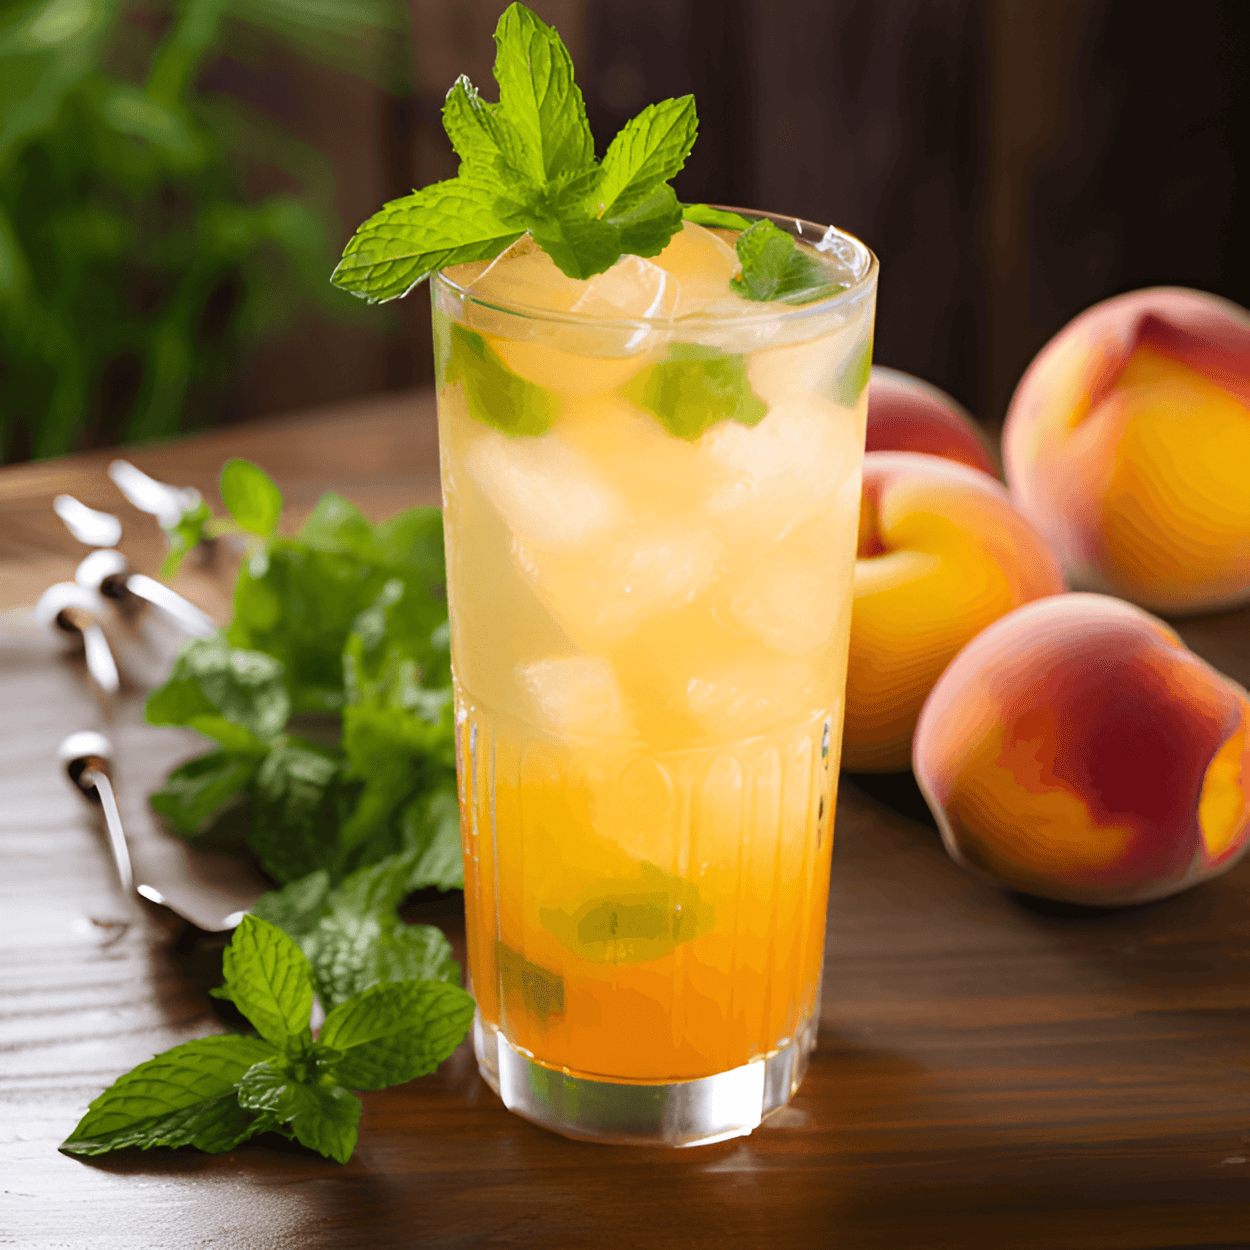 Peach Fuzz Vodka Cocktail Recipe - The Peach Fuzz Vodka cocktail is a delightful blend of sweet, tart, and slightly tangy flavors. The sweetness of the peach nectar is perfectly balanced by the tartness of the lime juice, while the vodka adds a subtle kick that makes this cocktail refreshingly crisp.